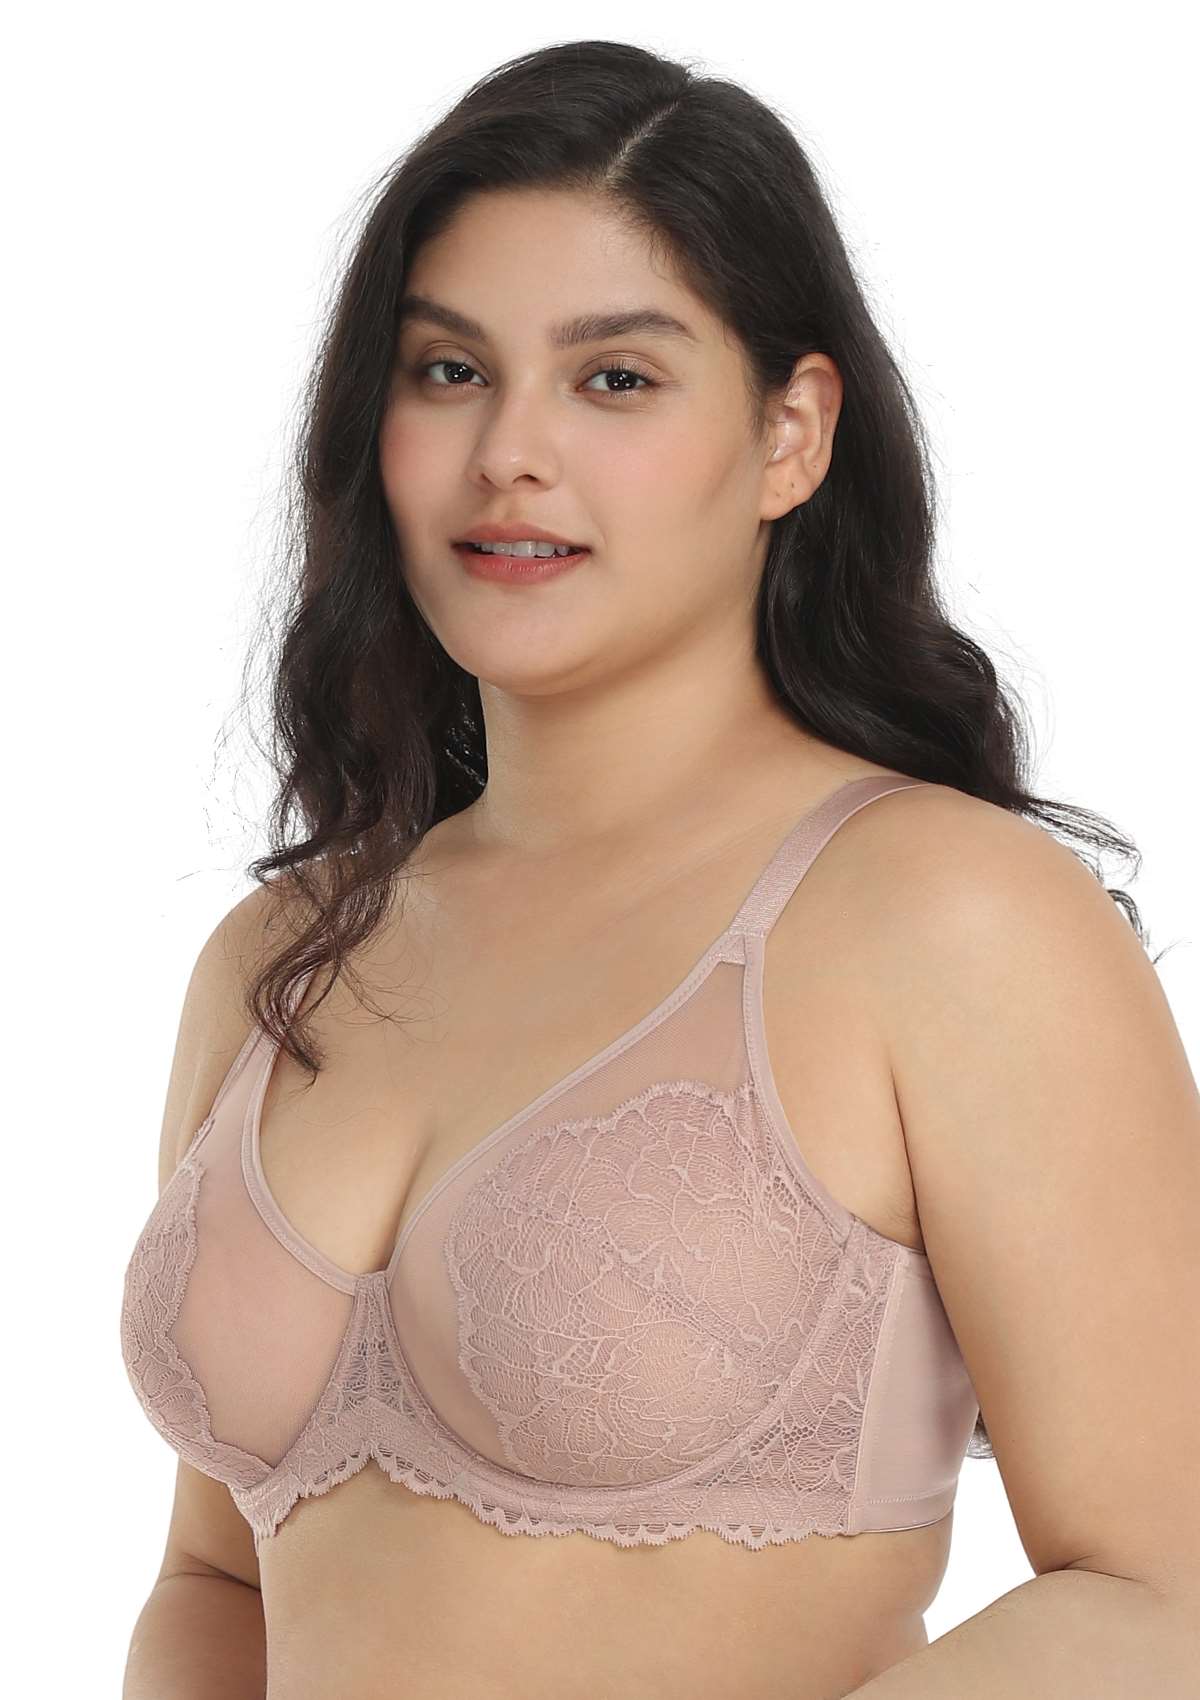 HSIA Blossom Lace Bra And Panties Set: Best Bra For Large Busts - Dark Pink / 34 / C